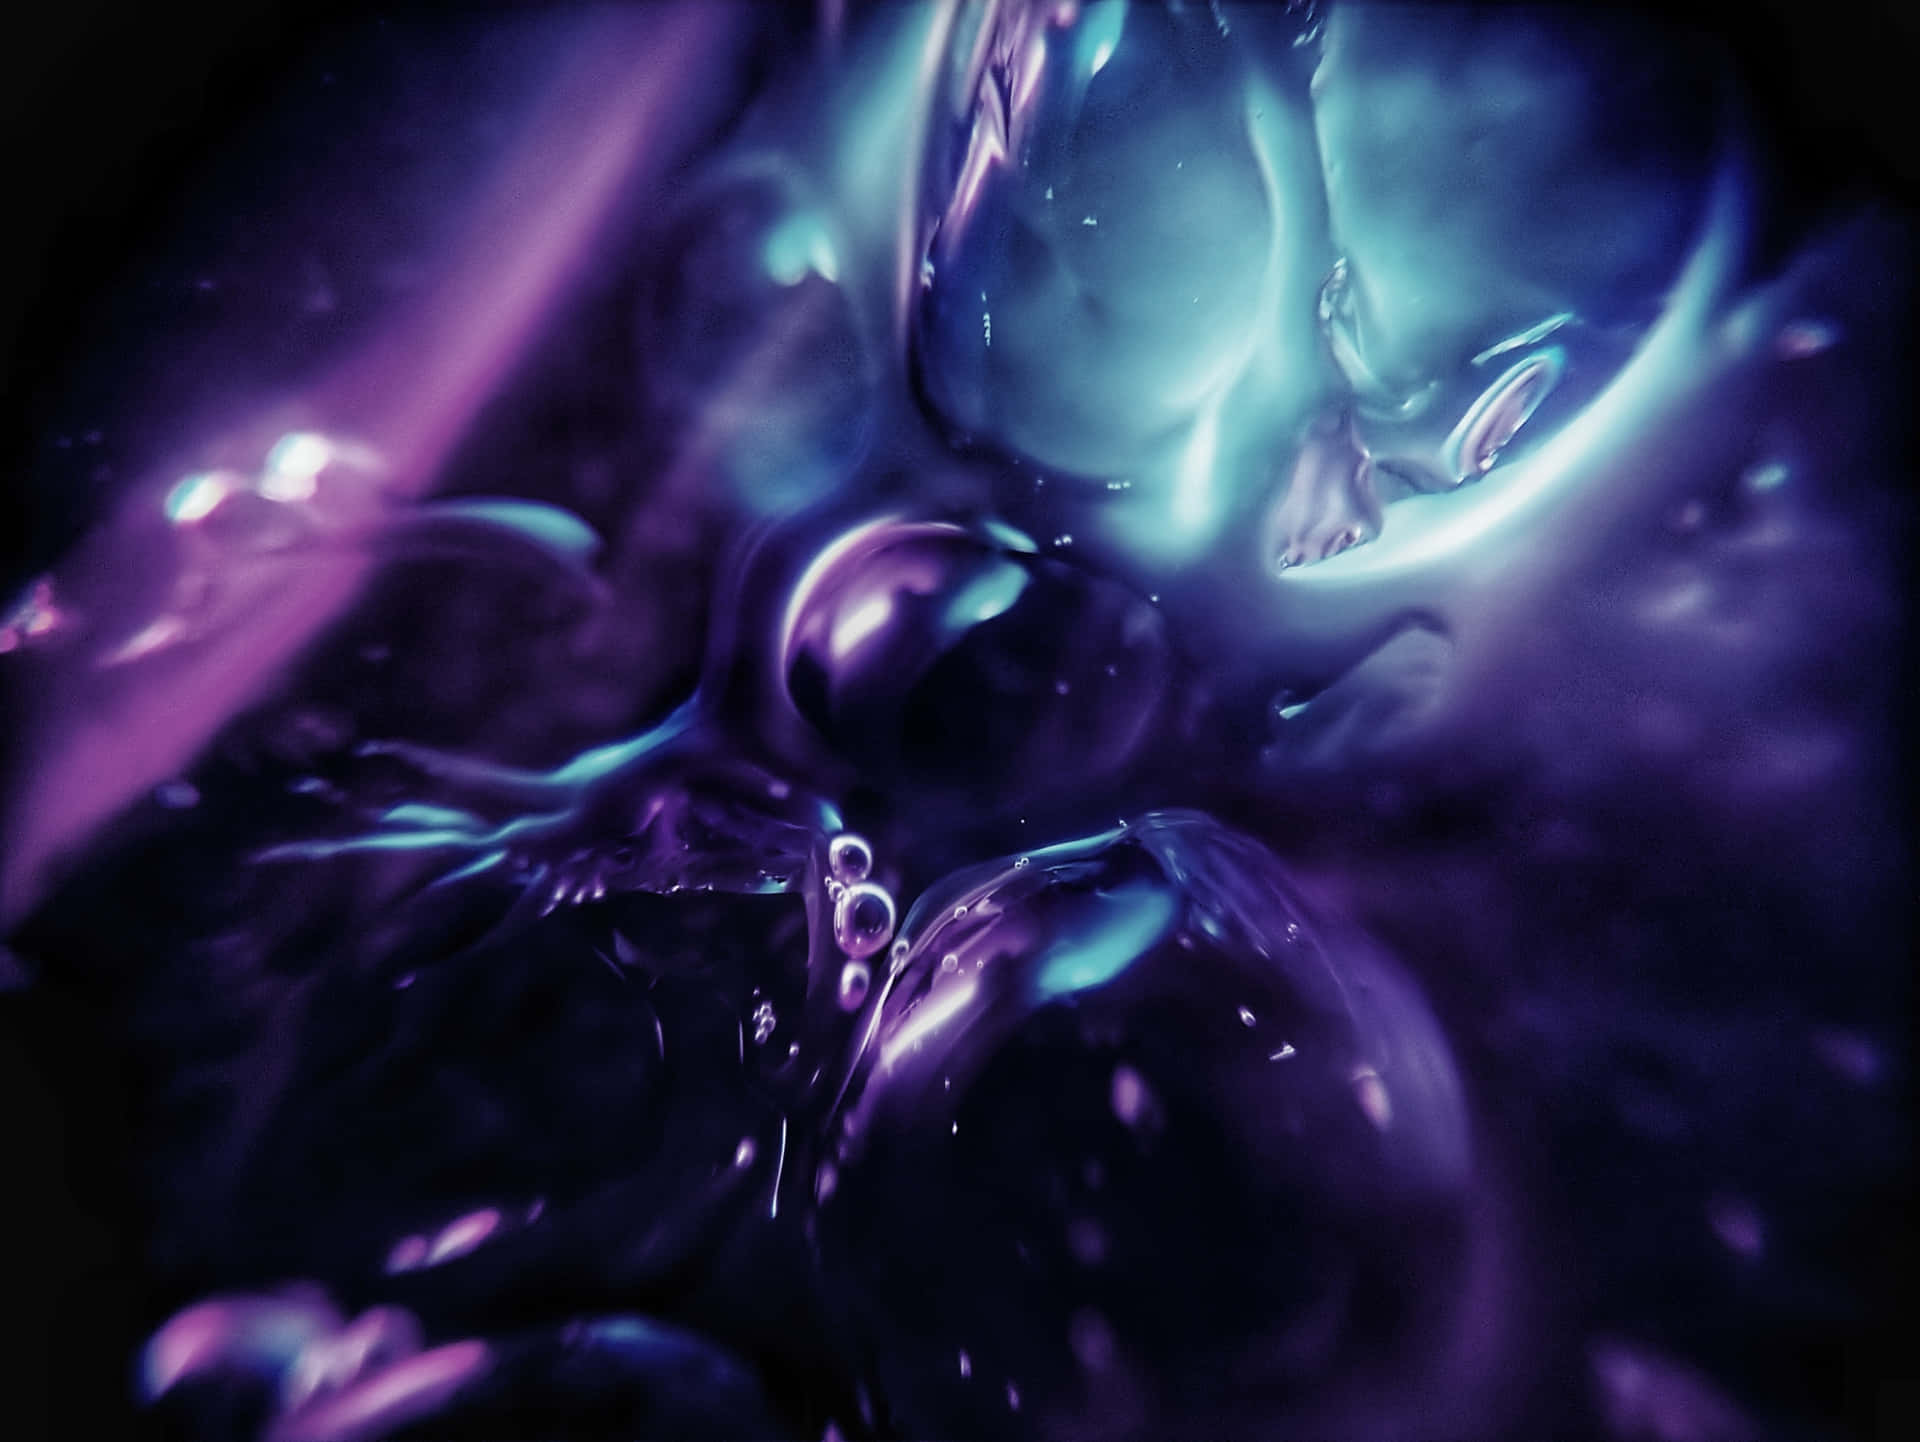 A Purple And Blue Image Of A Creature Wallpaper